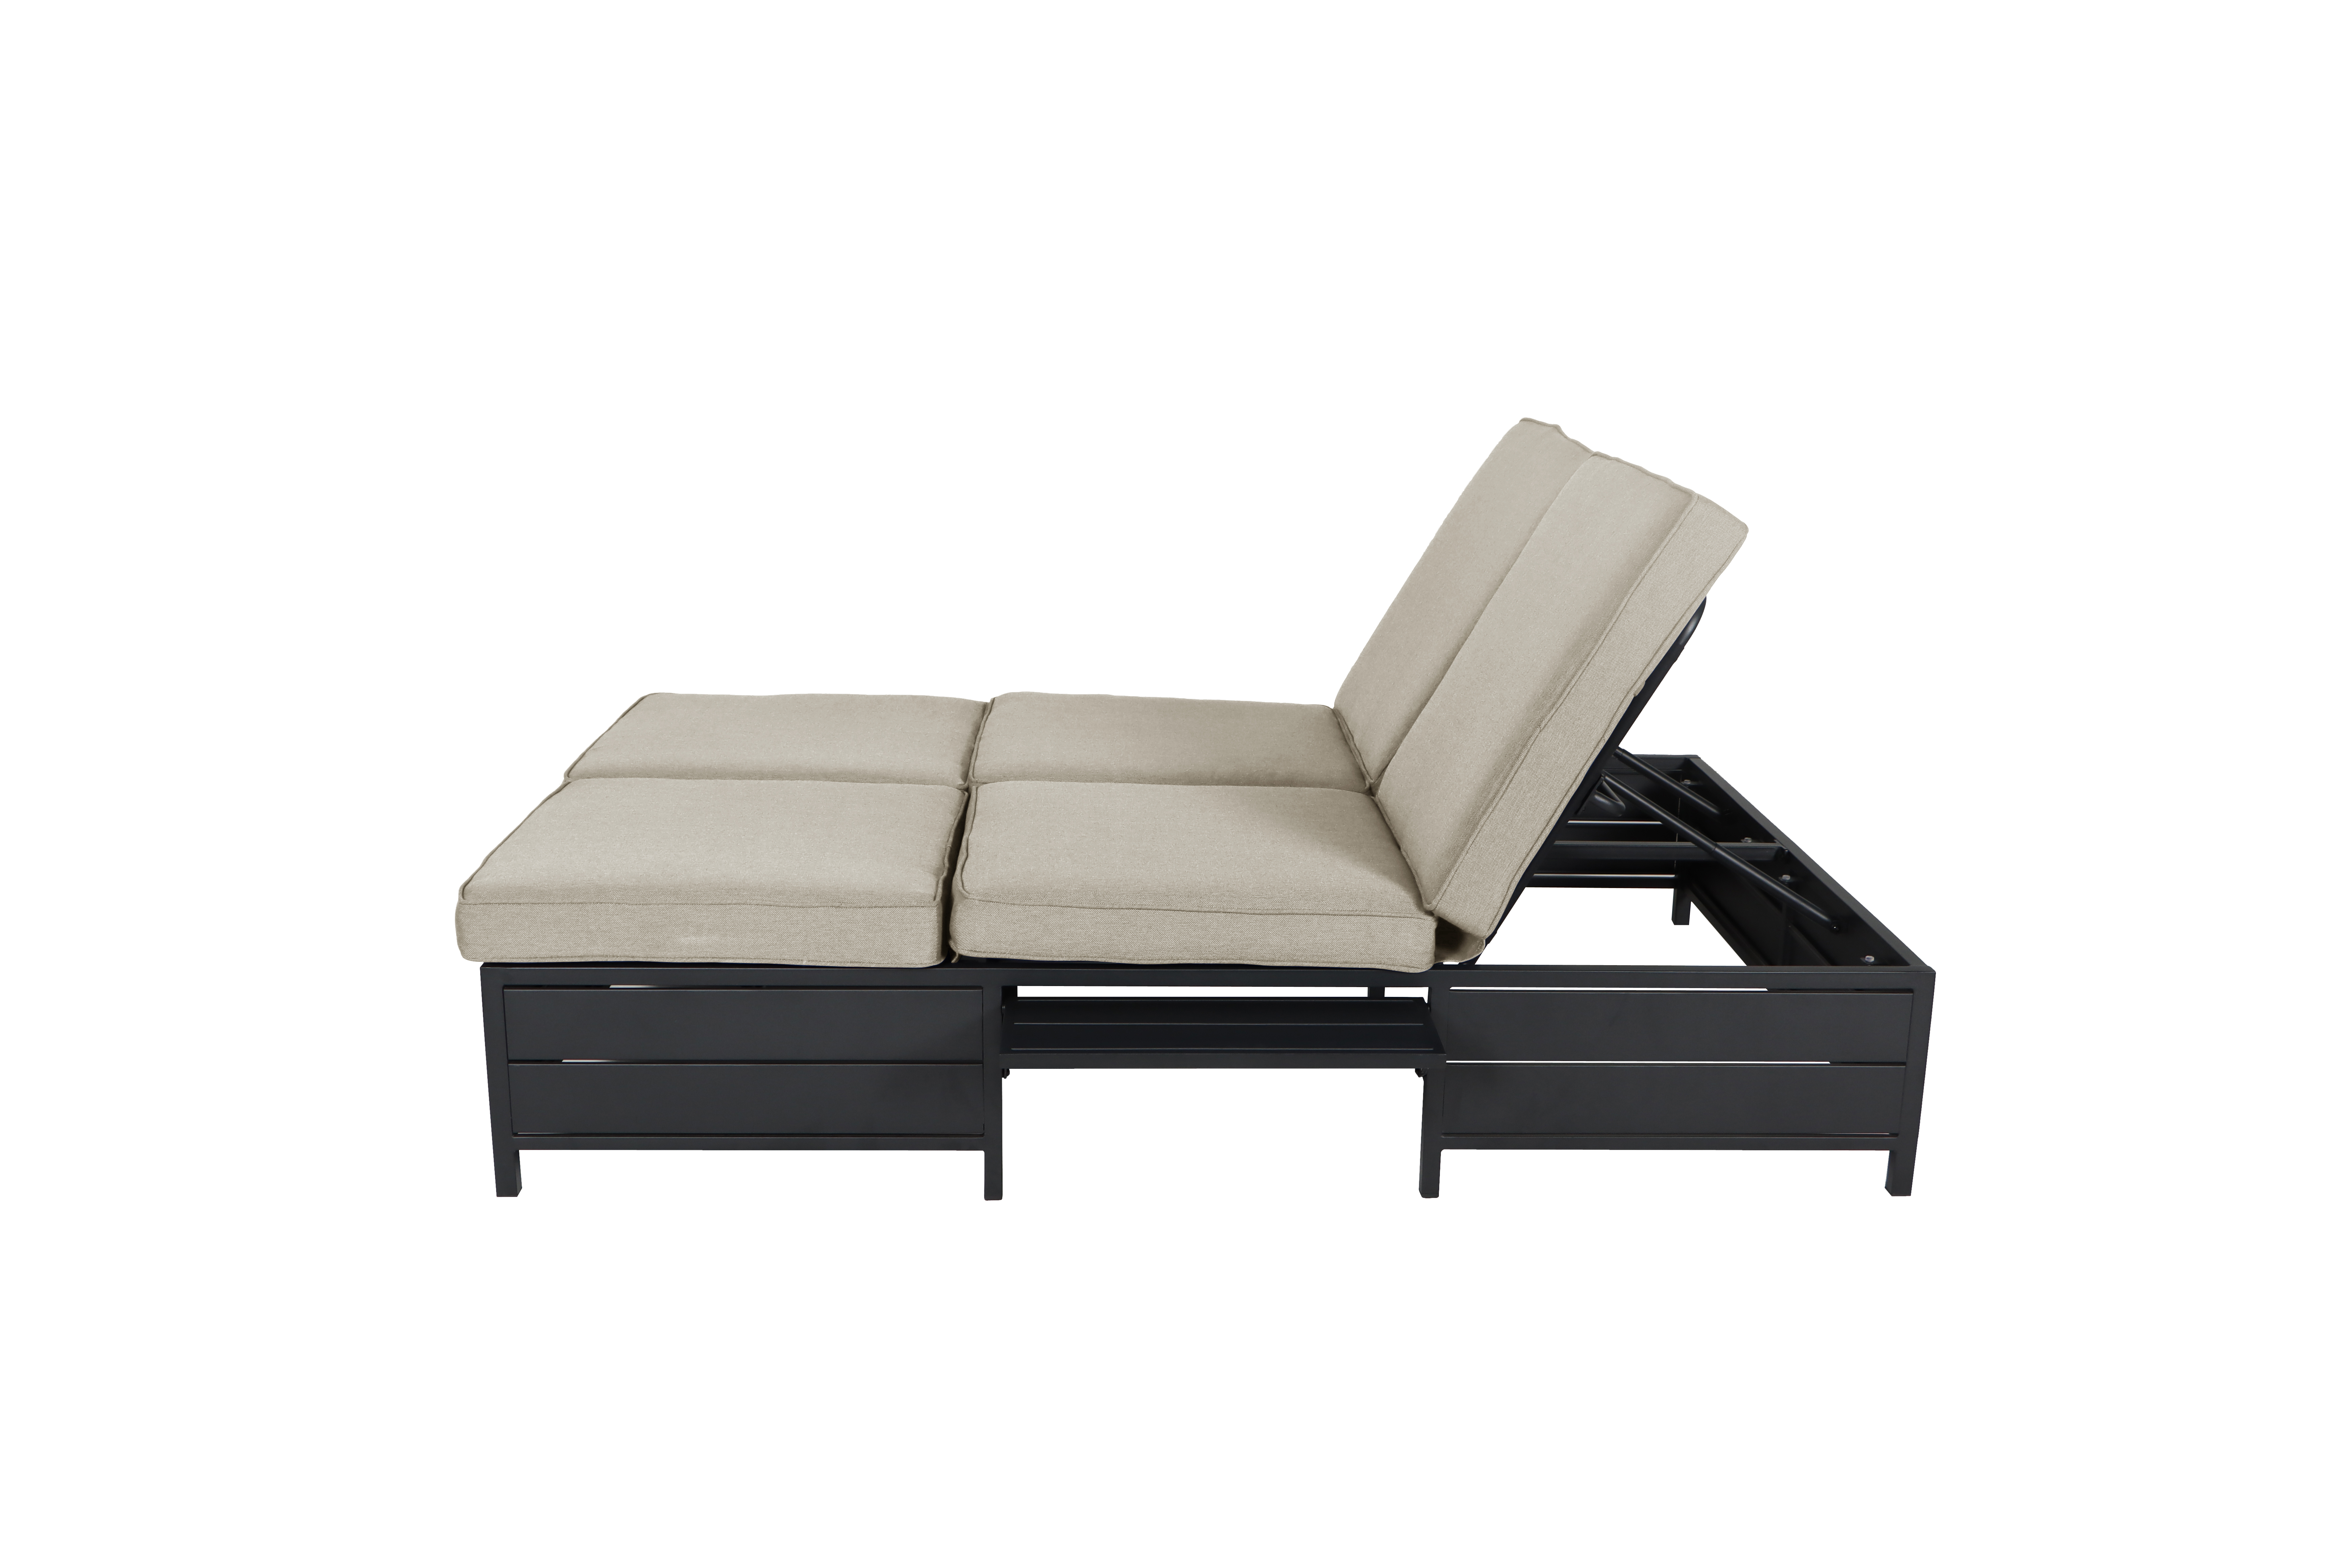 Mainstays Cushion Steel Outdoor Chaise Lounge - Tan/Black - image 2 of 5